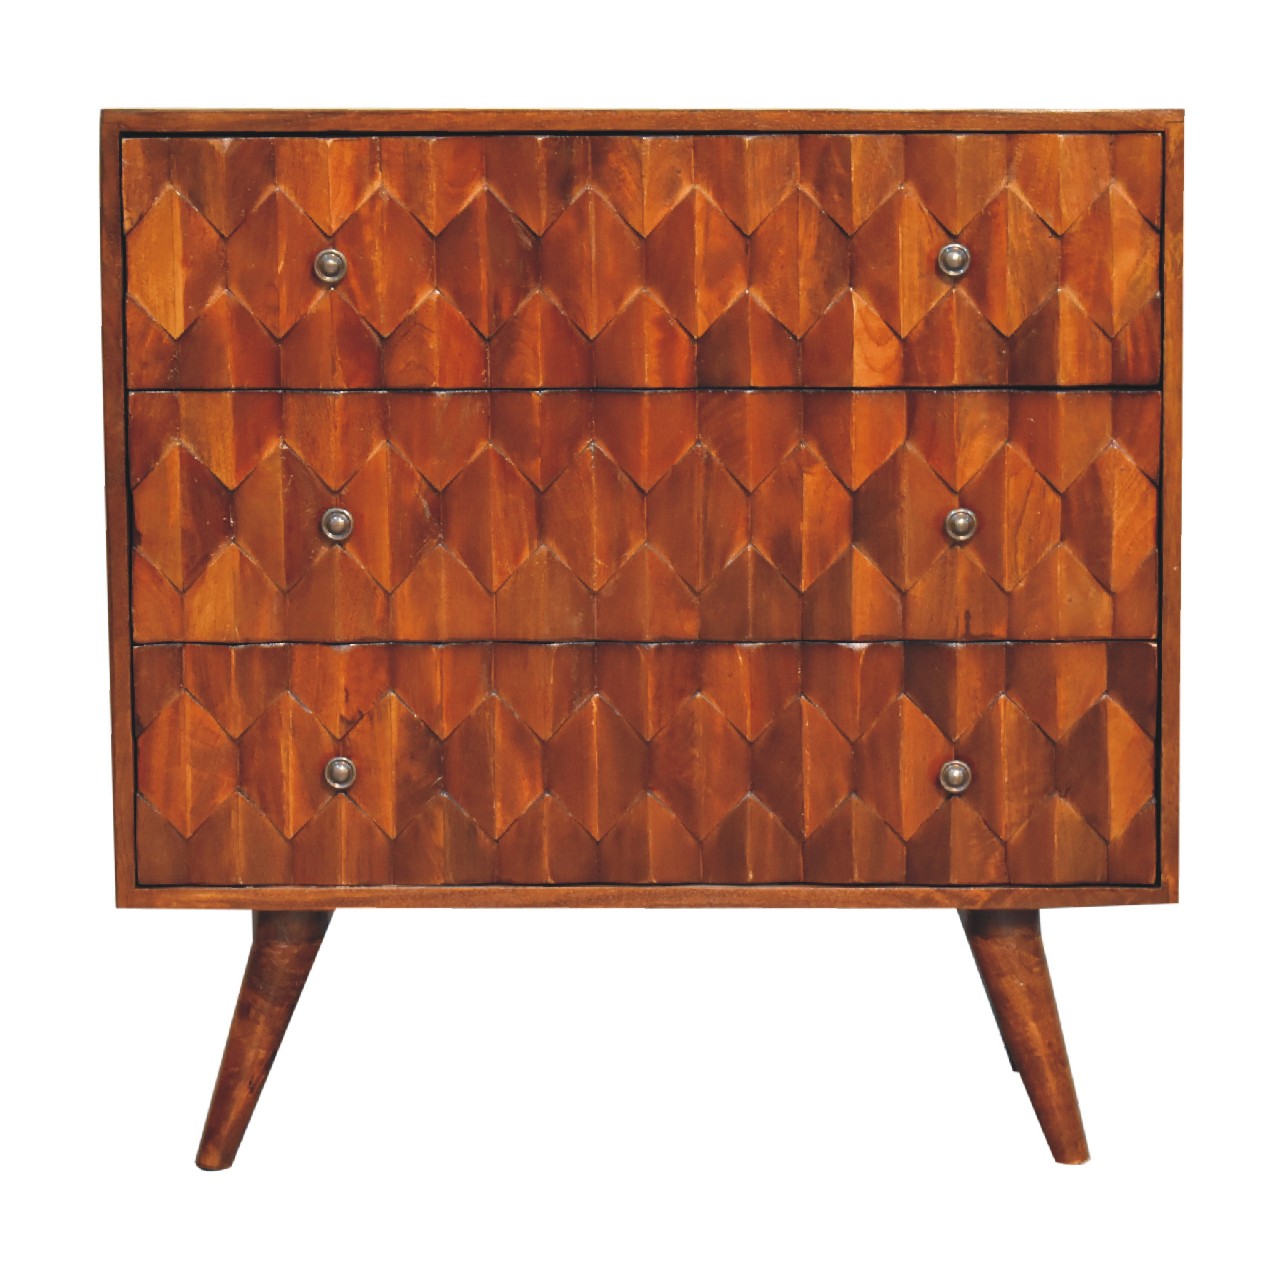 View Pineapple Chestnut Carved Chest information